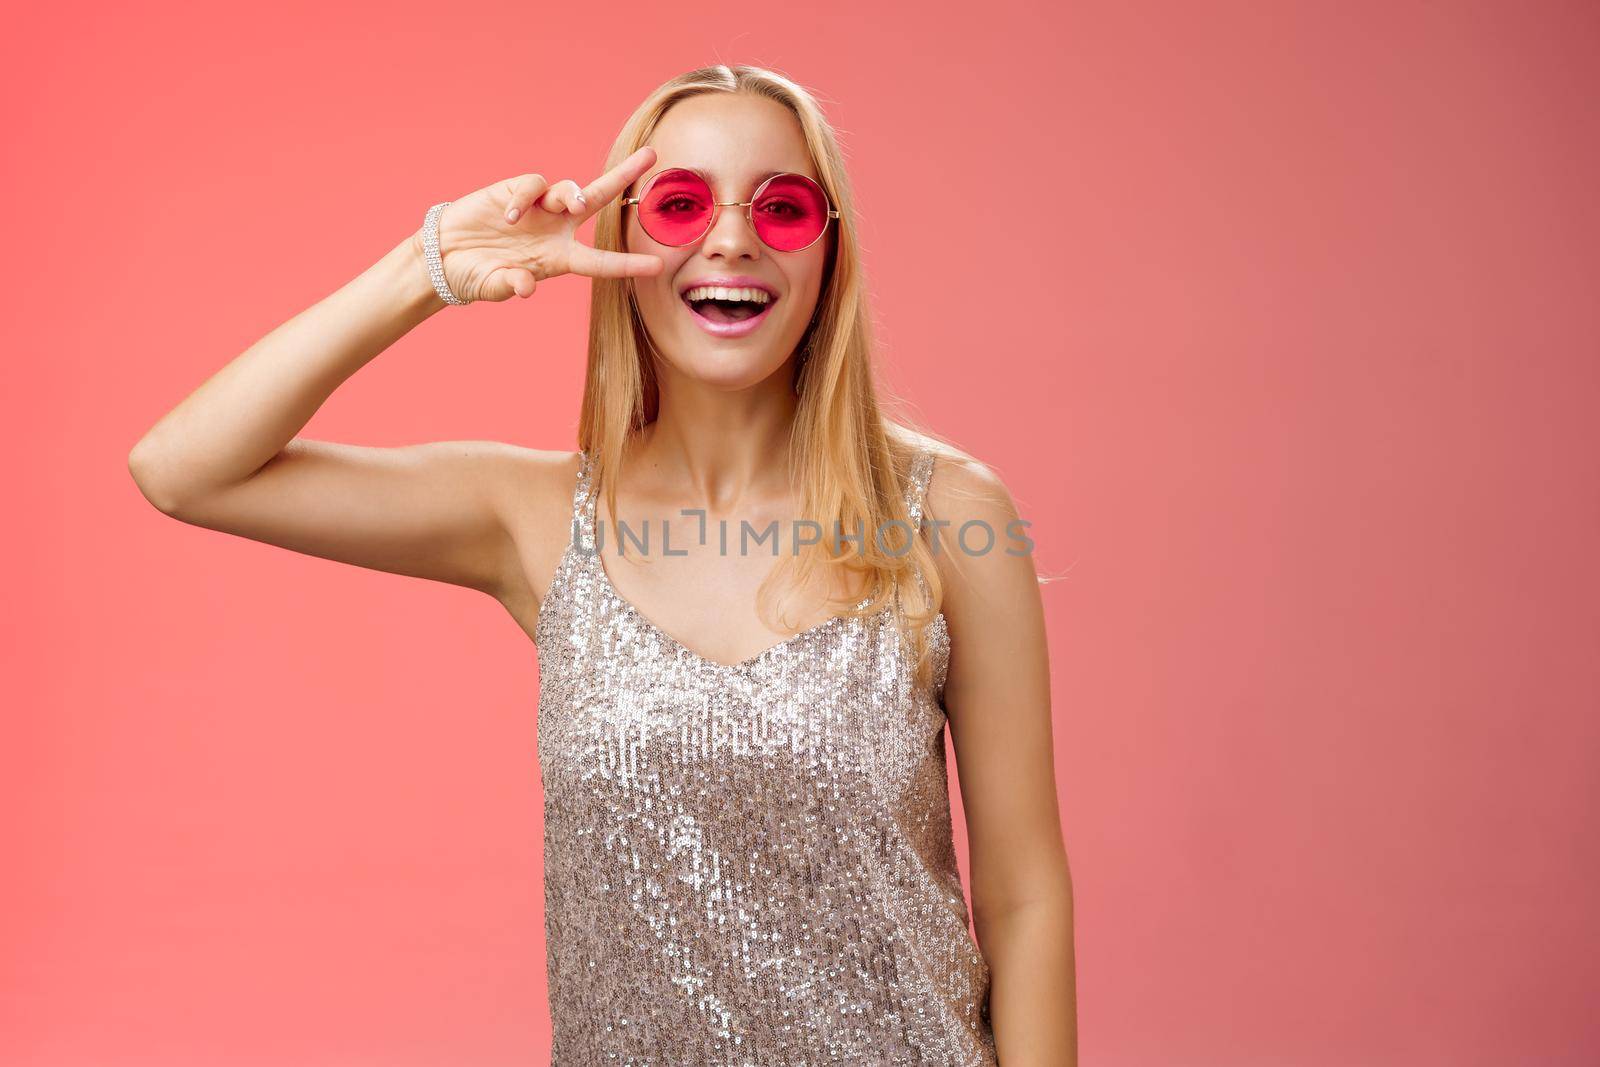 Energized friendly good-looking blond 25s woman in silver stylish dress sunglasses show peace victory gesture carefree smiling camera have fun enjoying cool party, standing red background.